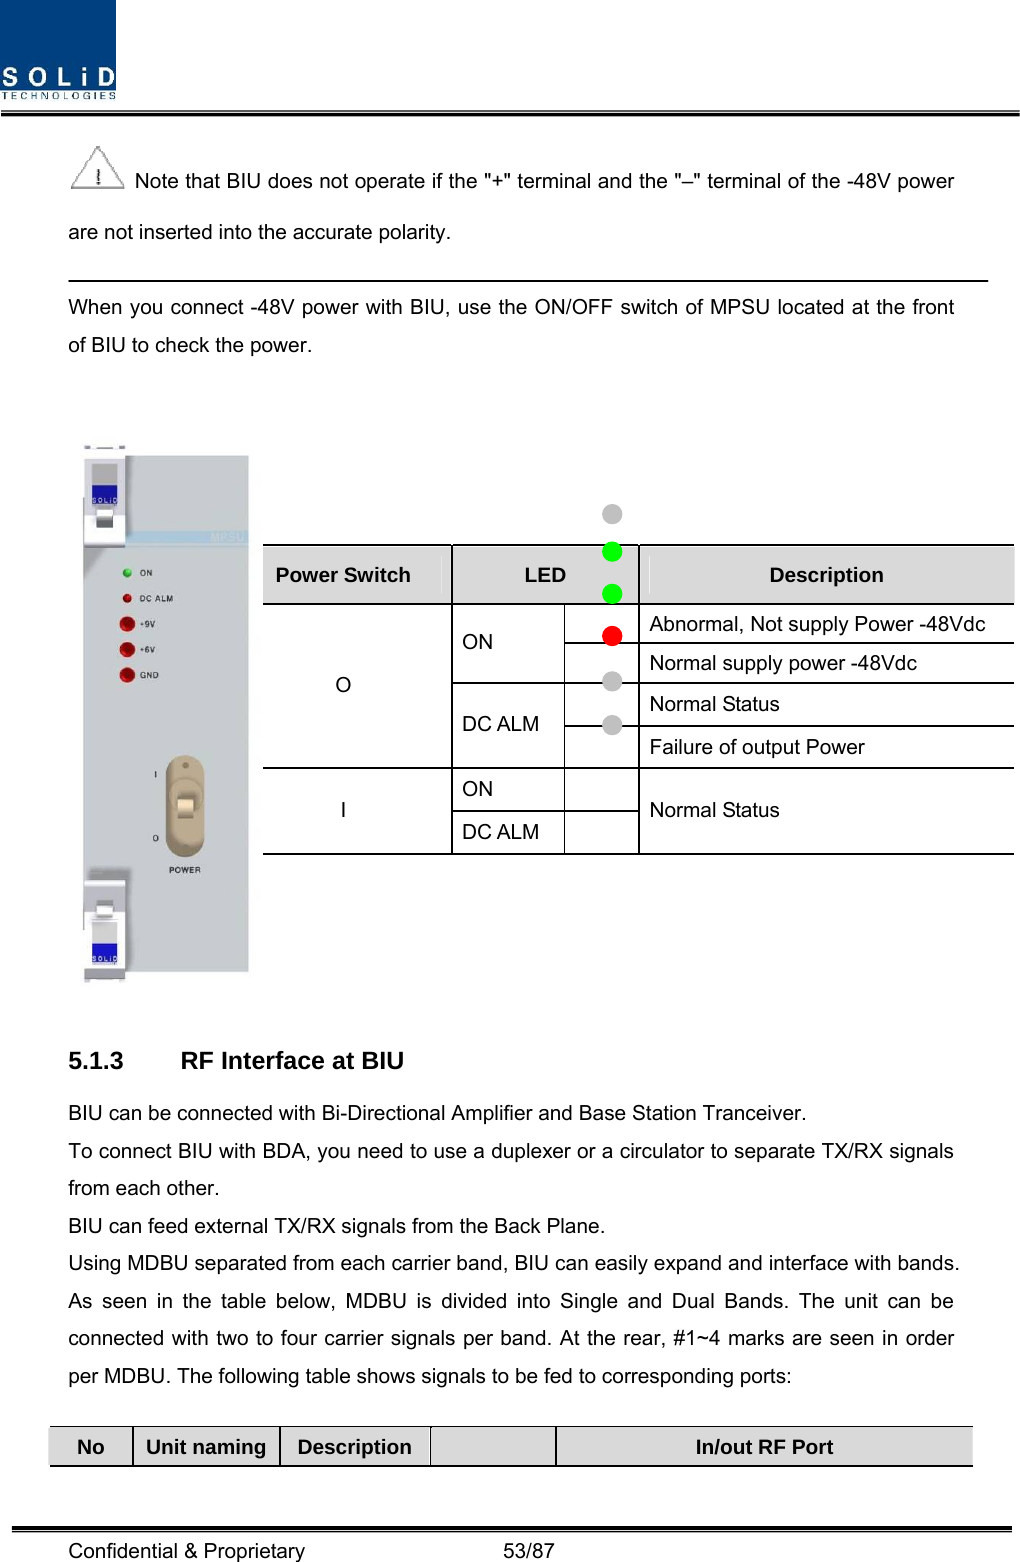  Confidential &amp; Proprietary                   53/87   Note that BIU does not operate if the &quot;+&quot; terminal and the &quot;–&quot; terminal of the -48V power are not inserted into the accurate polarity.    When you connect -48V power with BIU, use the ON/OFF switch of MPSU located at the front of BIU to check the power.     5.1.3  RF Interface at BIU BIU can be connected with Bi-Directional Amplifier and Base Station Tranceiver.     To connect BIU with BDA, you need to use a duplexer or a circulator to separate TX/RX signals from each other. BIU can feed external TX/RX signals from the Back Plane. Using MDBU separated from each carrier band, BIU can easily expand and interface with bands. As seen in the table below, MDBU is divided into Single and Dual Bands. The unit can be connected with two to four carrier signals per band. At the rear, #1~4 marks are seen in order per MDBU. The following table shows signals to be fed to corresponding ports:  No  Unit naming Description  In/out RF Port Power Switch  LED  Description   Abnormal, Not supply Power -48Vdc ON   Normal supply power -48Vdc  Normal Status O DC ALM   Failure of output Power ON  I DC ALM   Normal Status 